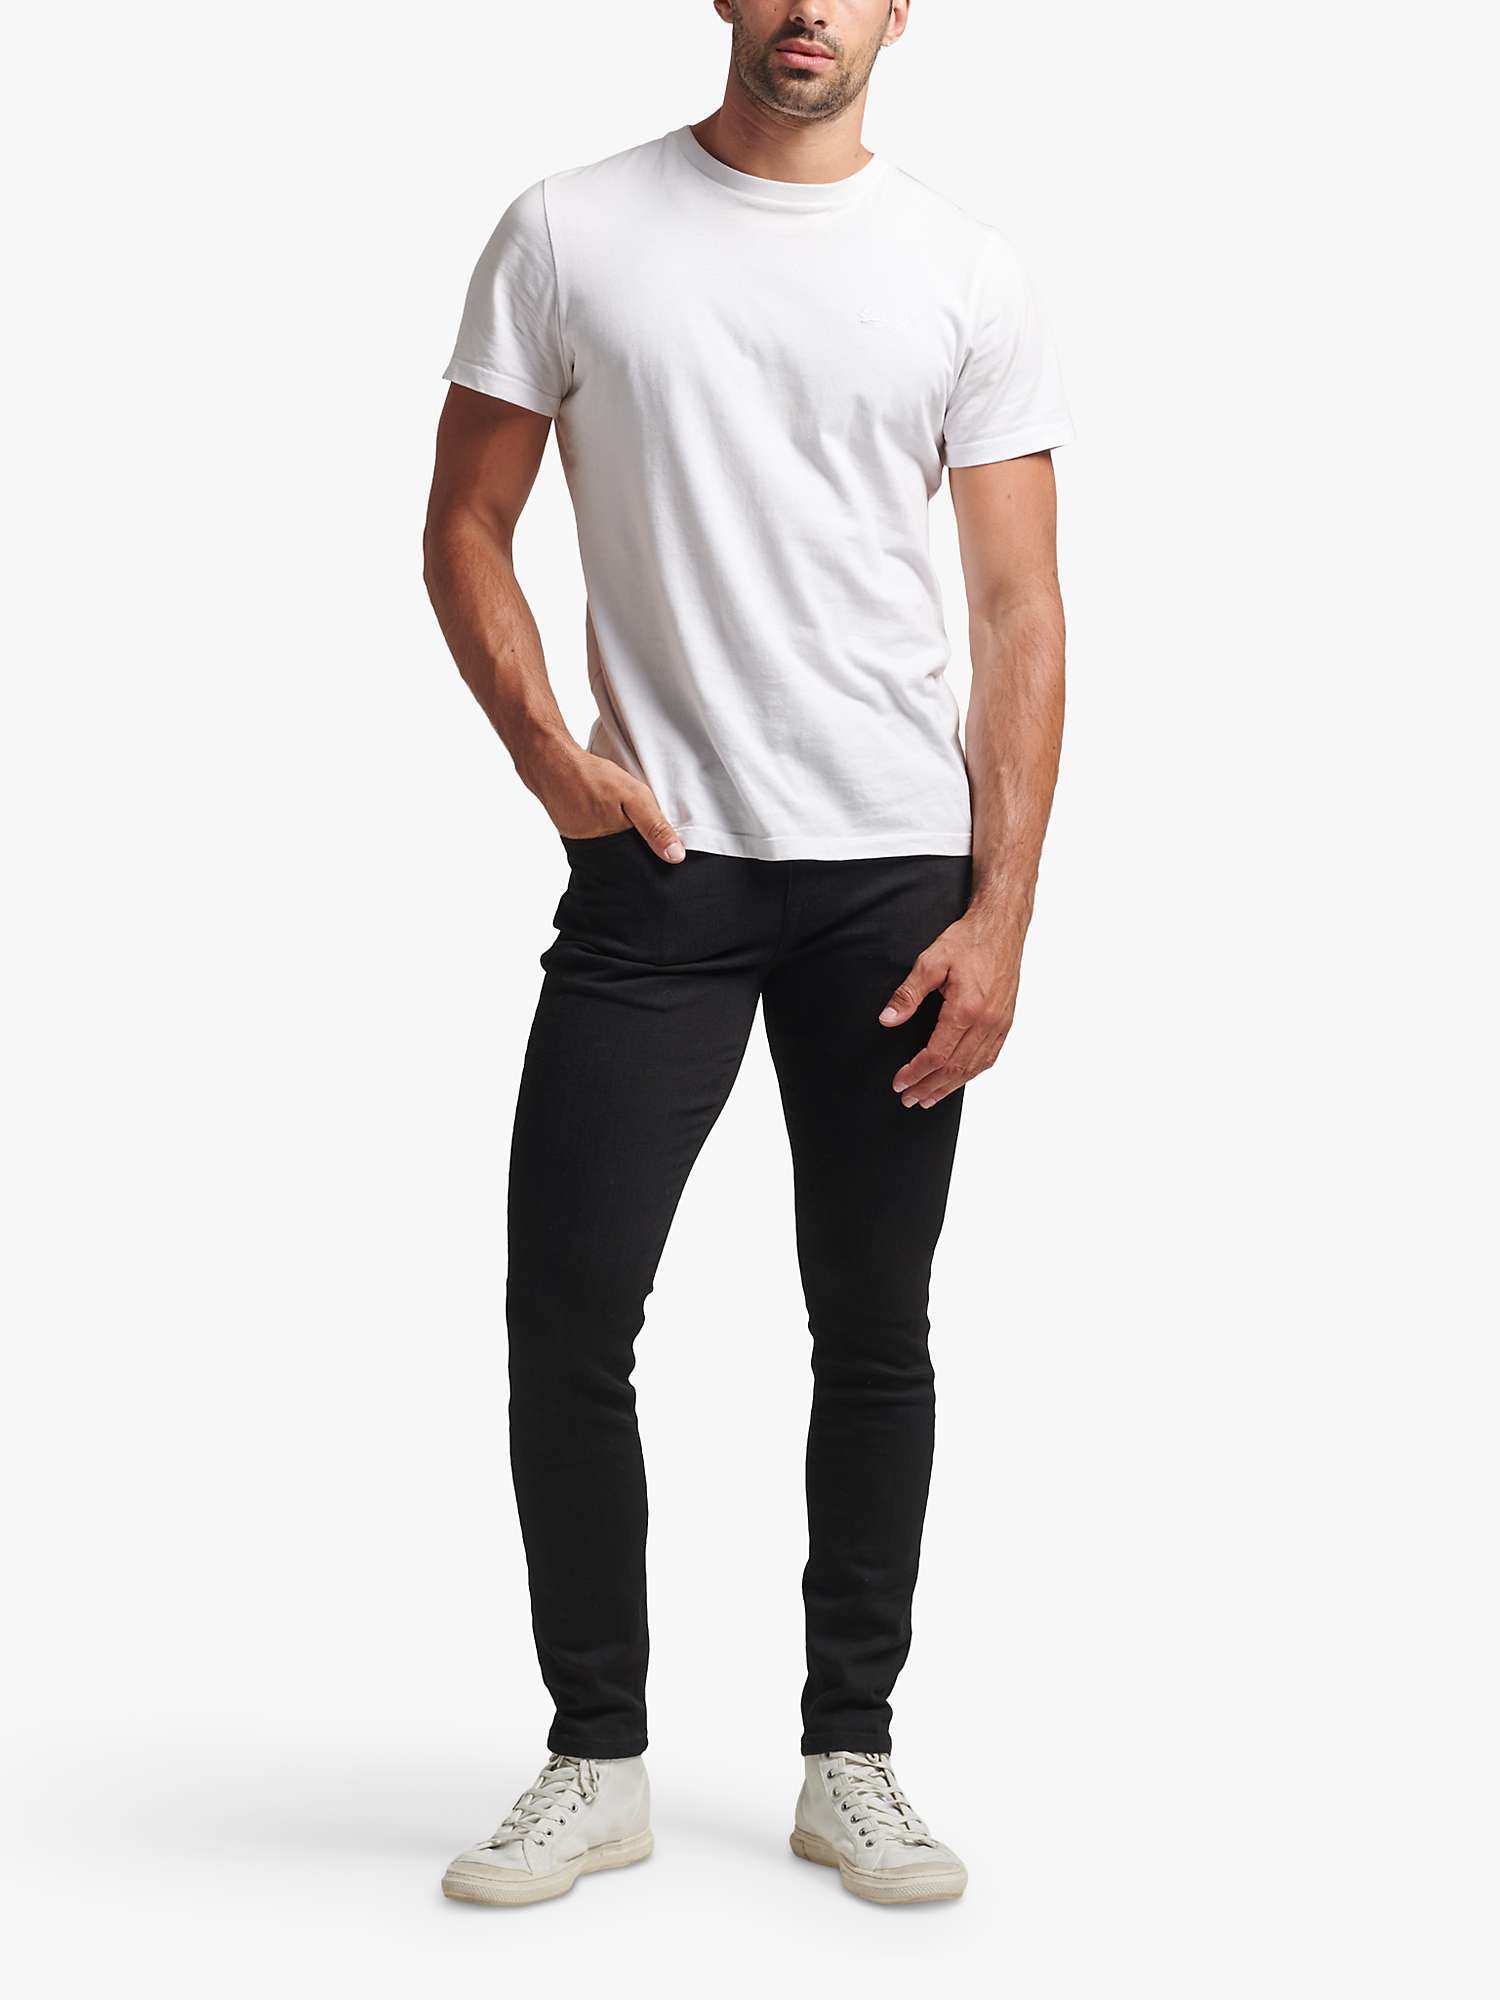 Buy Superdry Organic Cotton Skinny Jeans Online at johnlewis.com